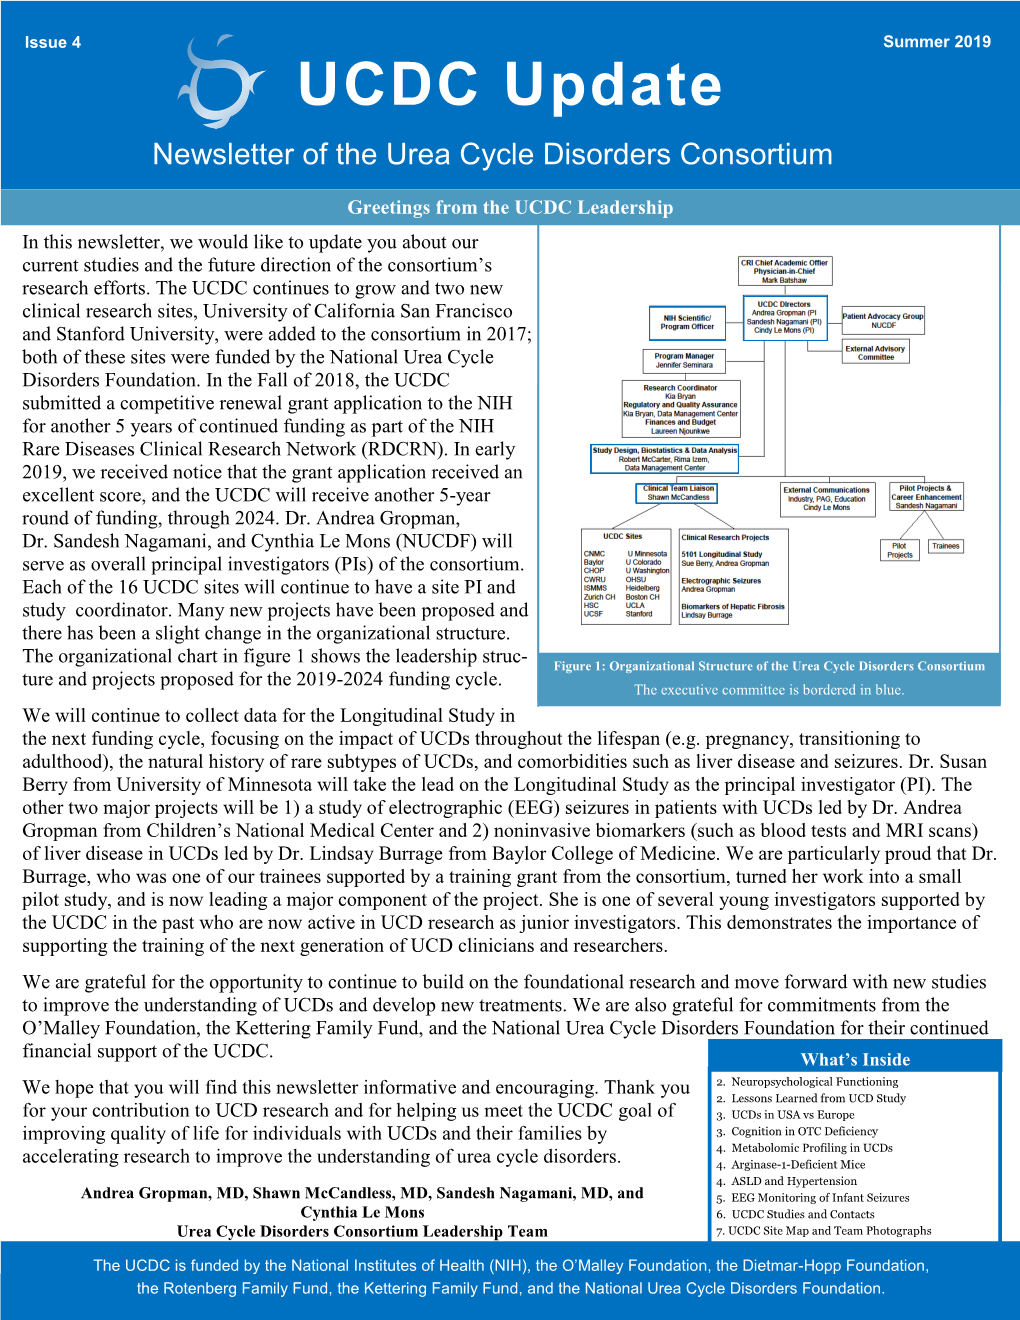 UCDC Update Newsletter of the Urea Cycle Disorders Consortium